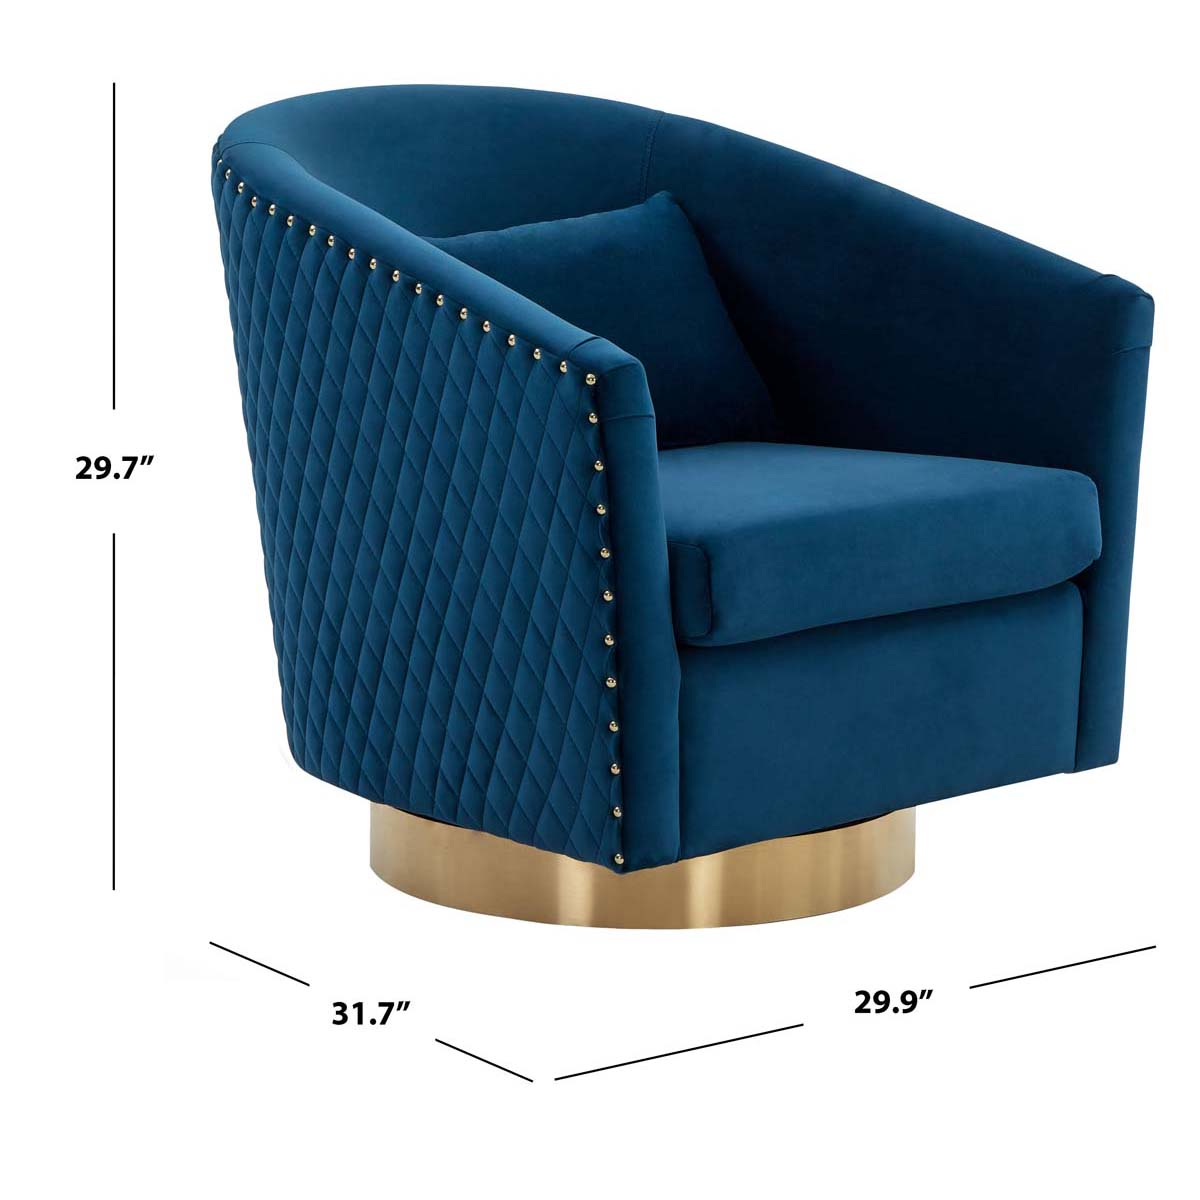 Safavieh Couture Clara Quilted Swivel Tub Chair - Navy